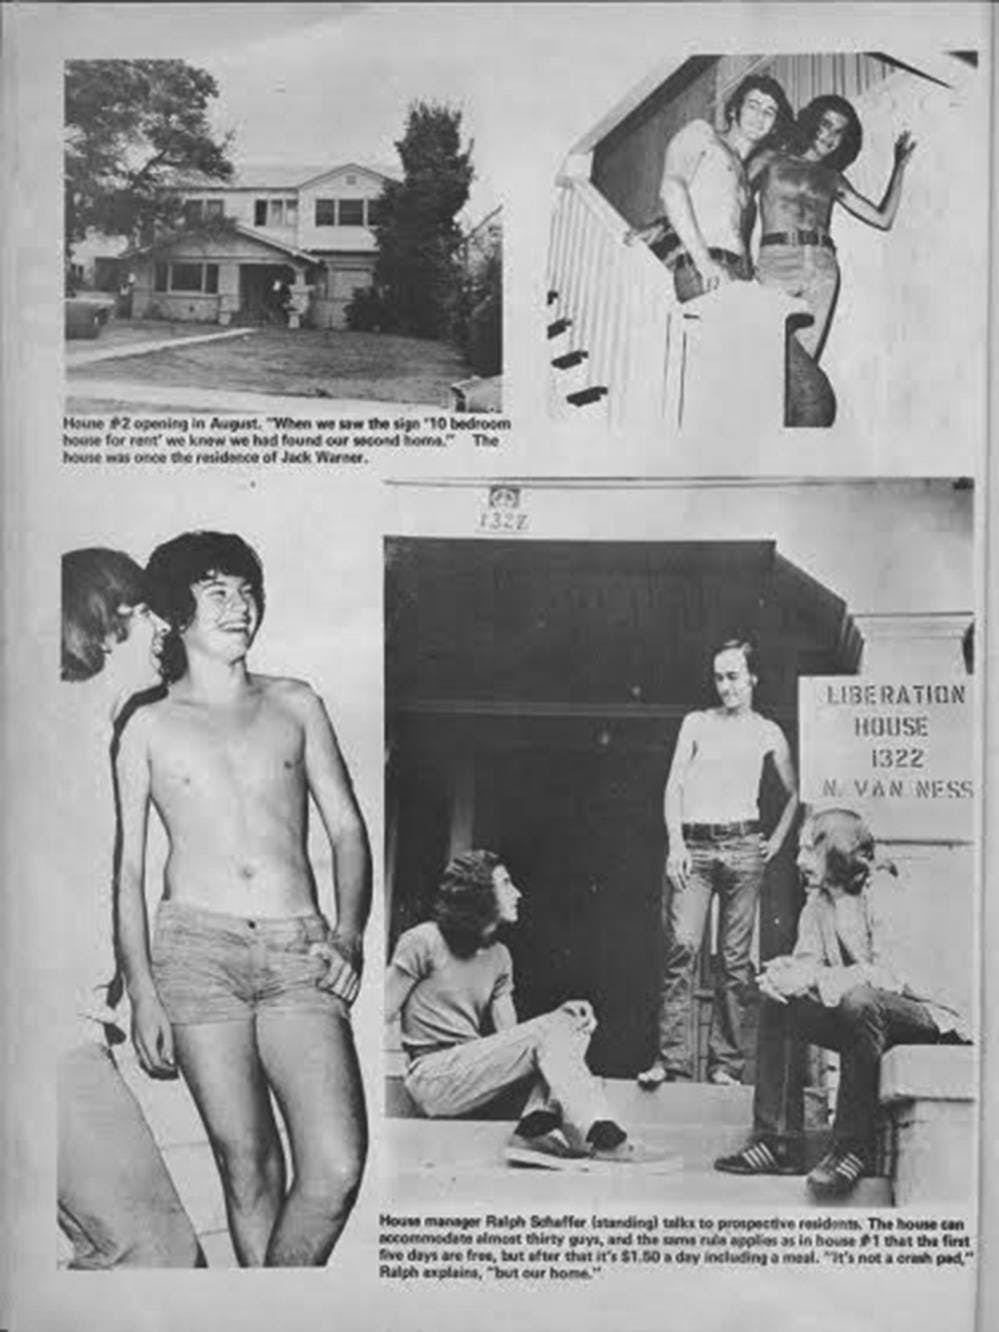 Spree, October 1974. In addition to fliers and GCSC meetings, potential Liberation House residents could encounter the program via pornography and entertainment.